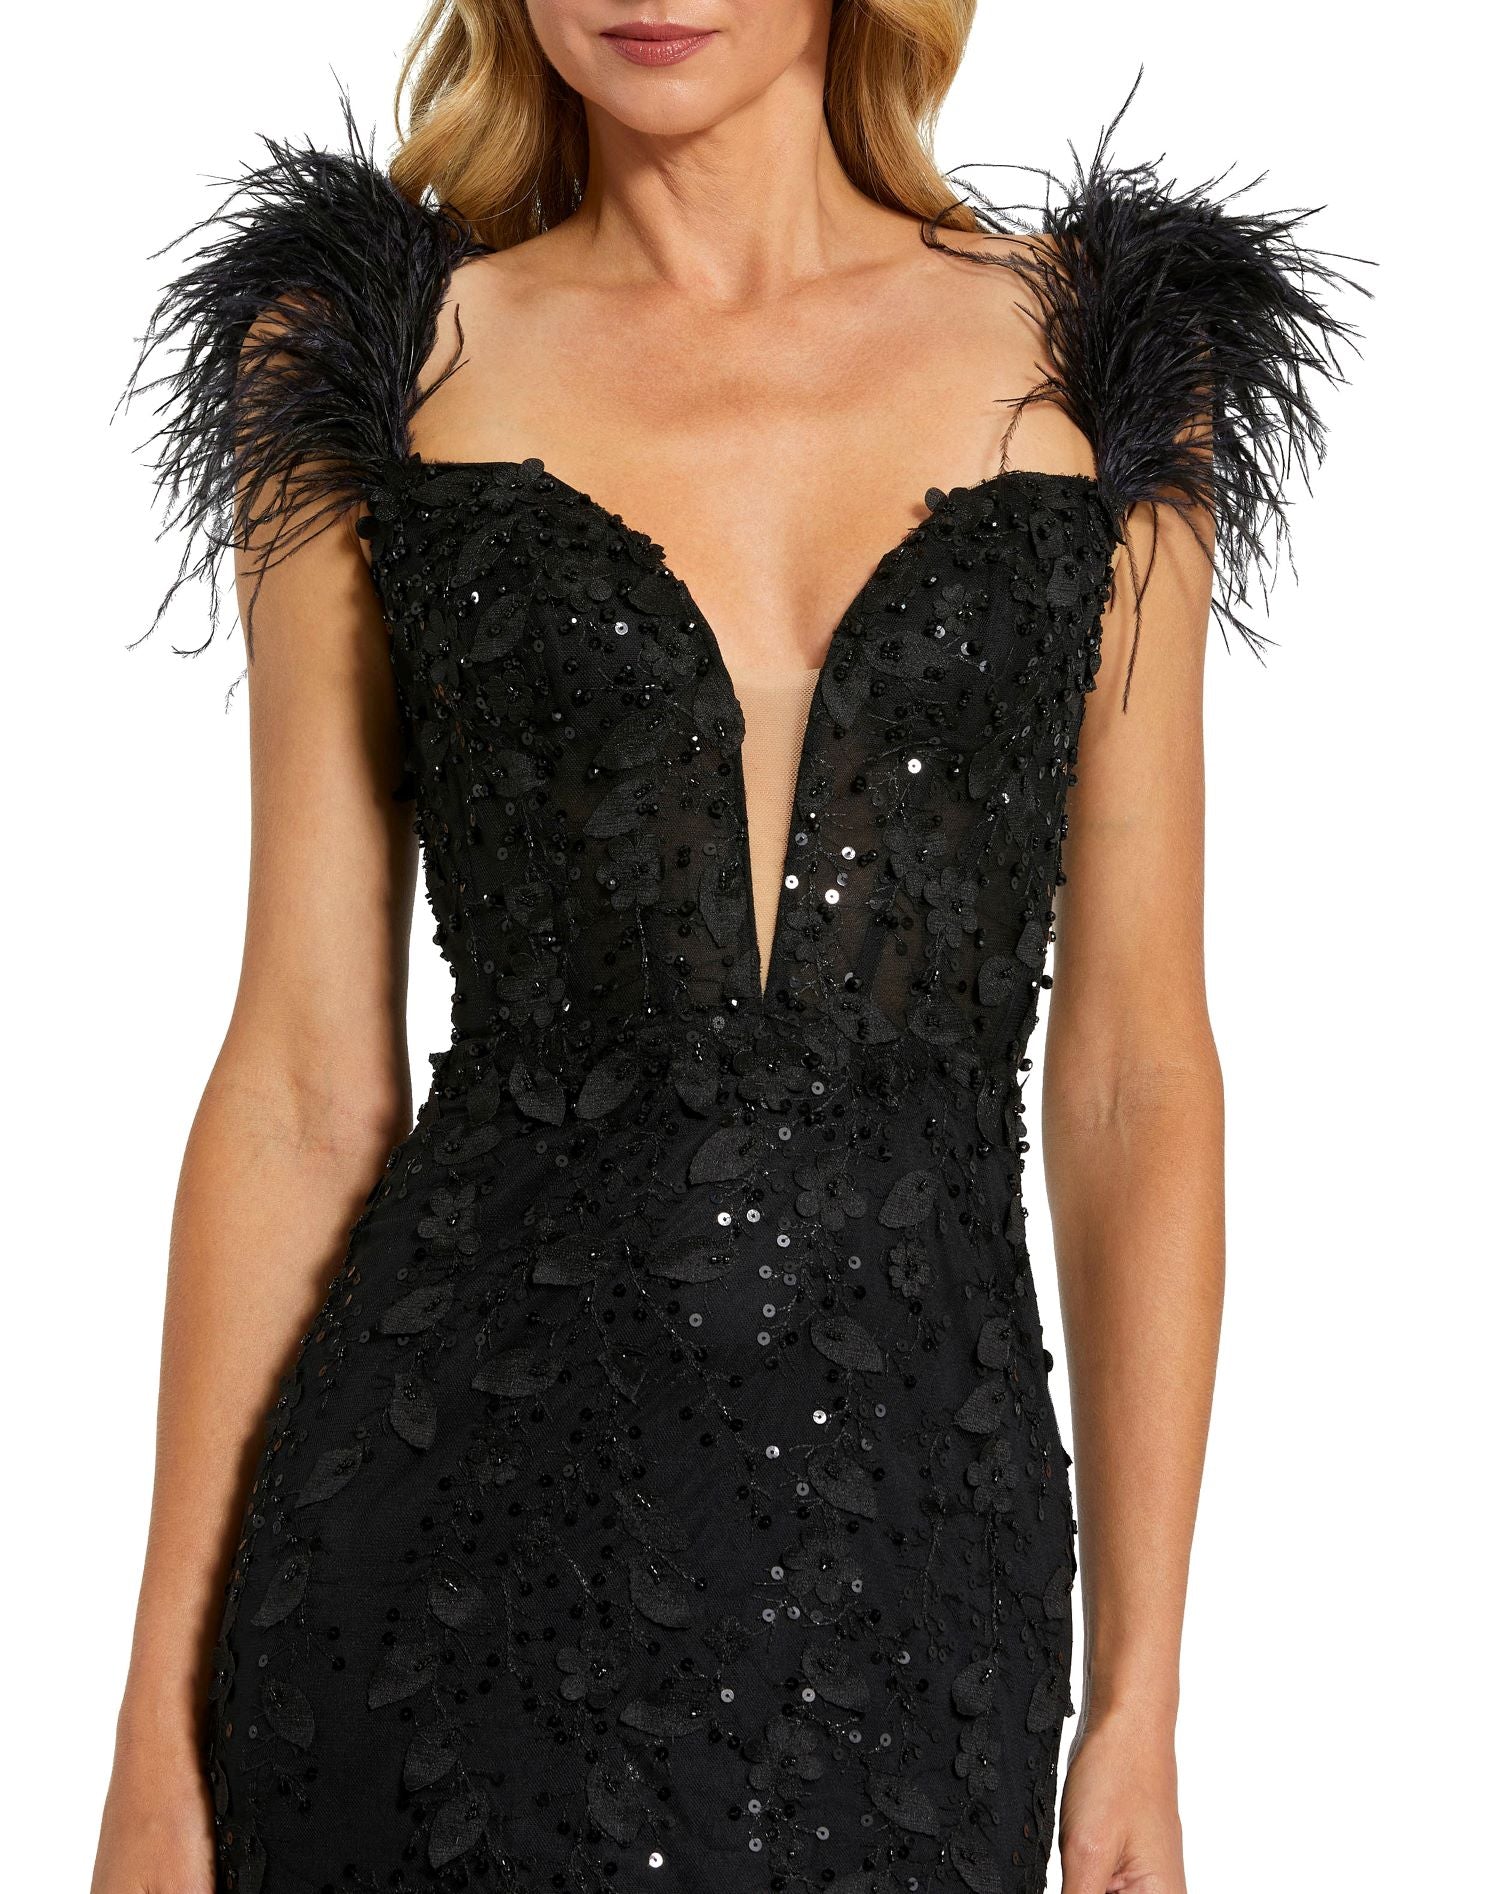 Sheer Applique Bustier Gown with Feather Straps